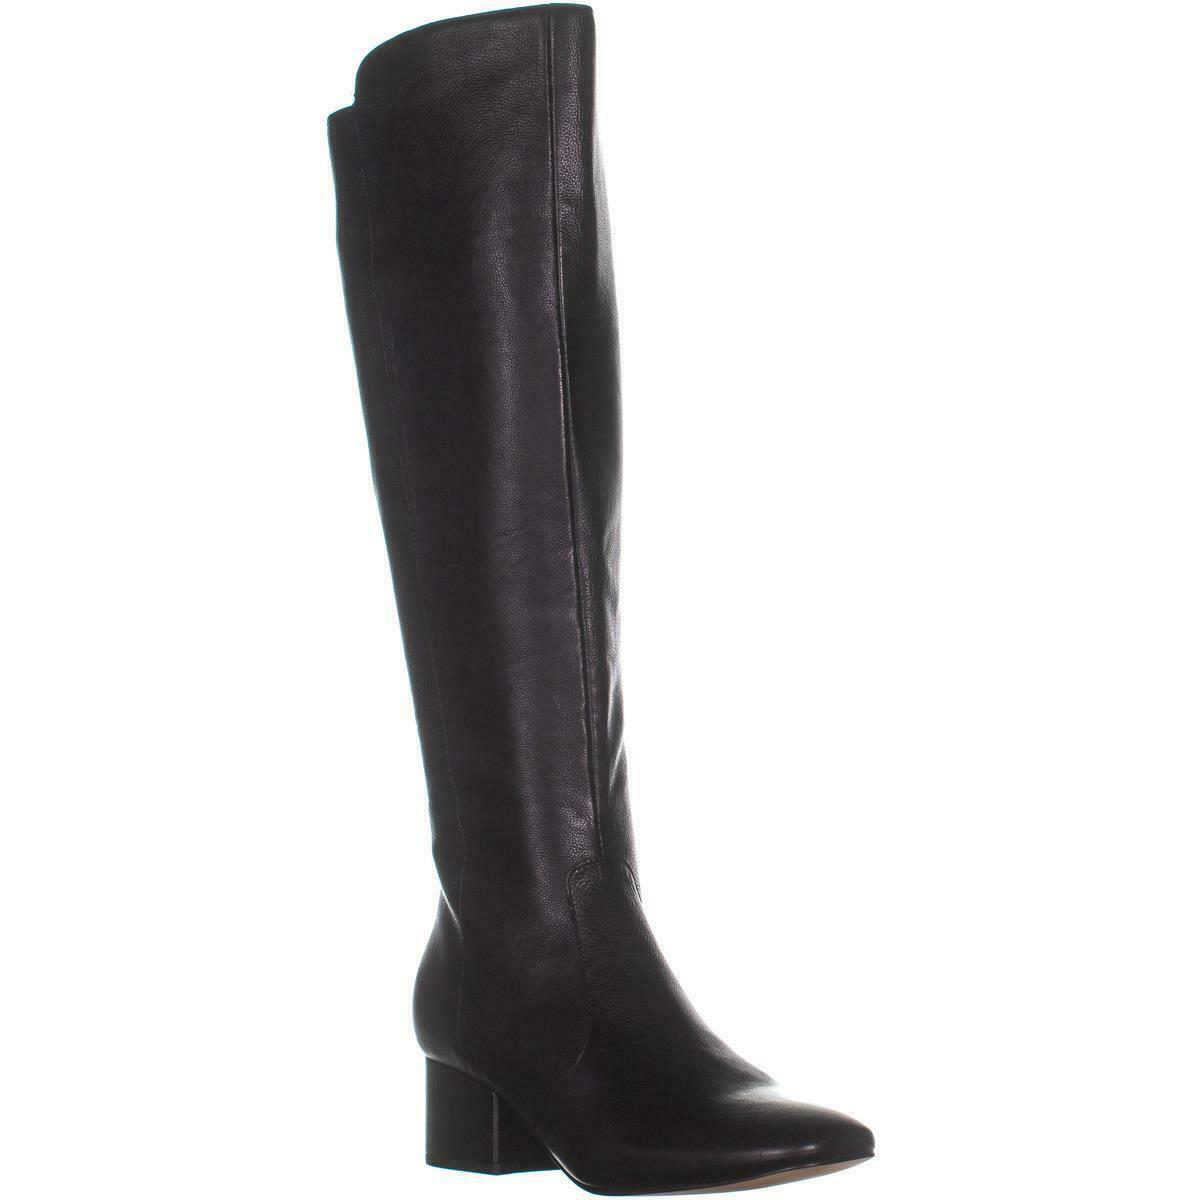 Marc Fisher Tawn Knee High Boots, Black, 9 US - Boots